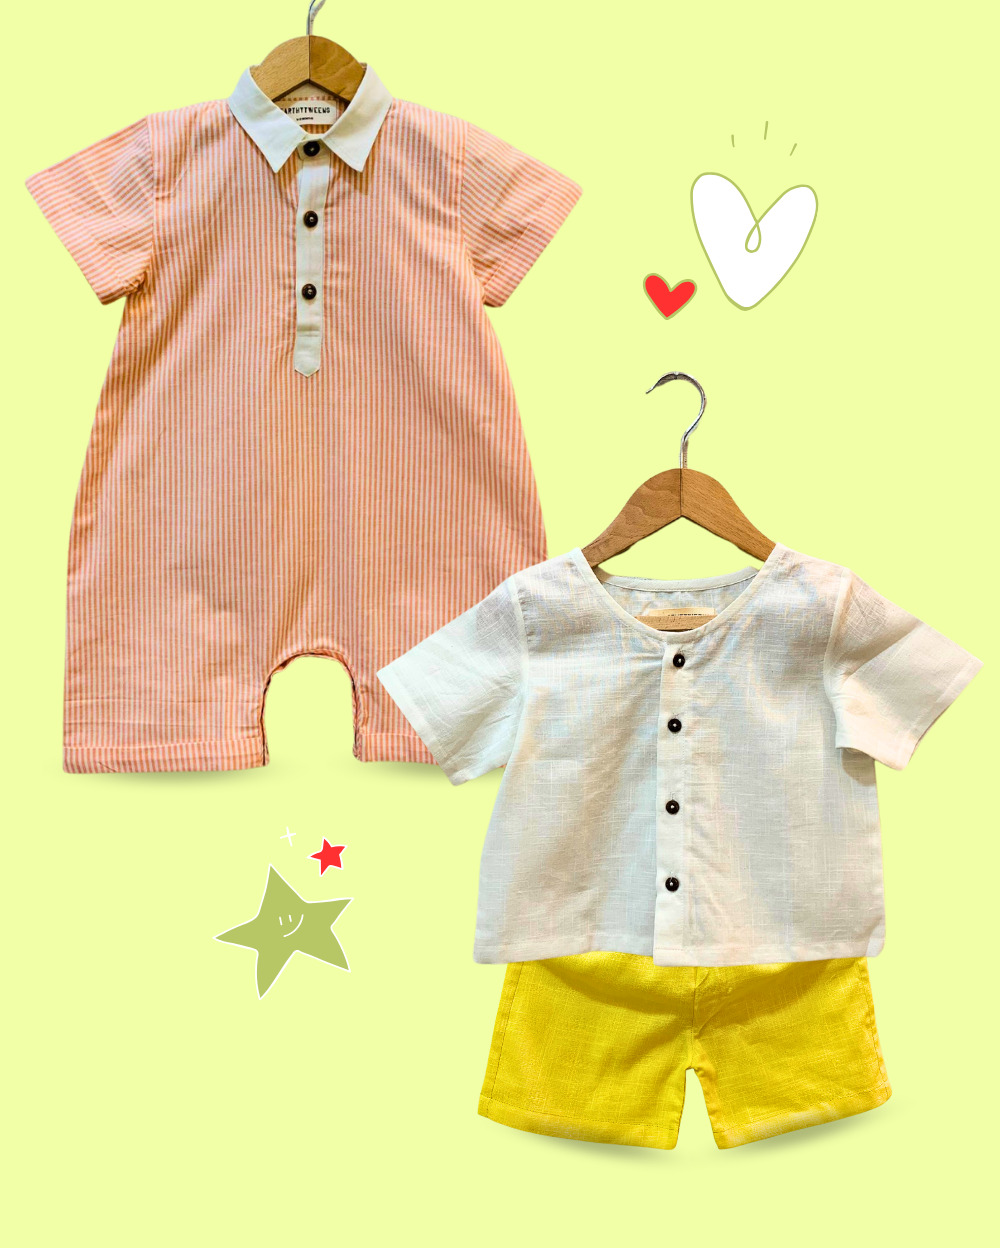 100% Cotton White Top & Yellow Shorts Baby Set' and 'Orange Striped Romper for Baby Boys - 2 Piece Set